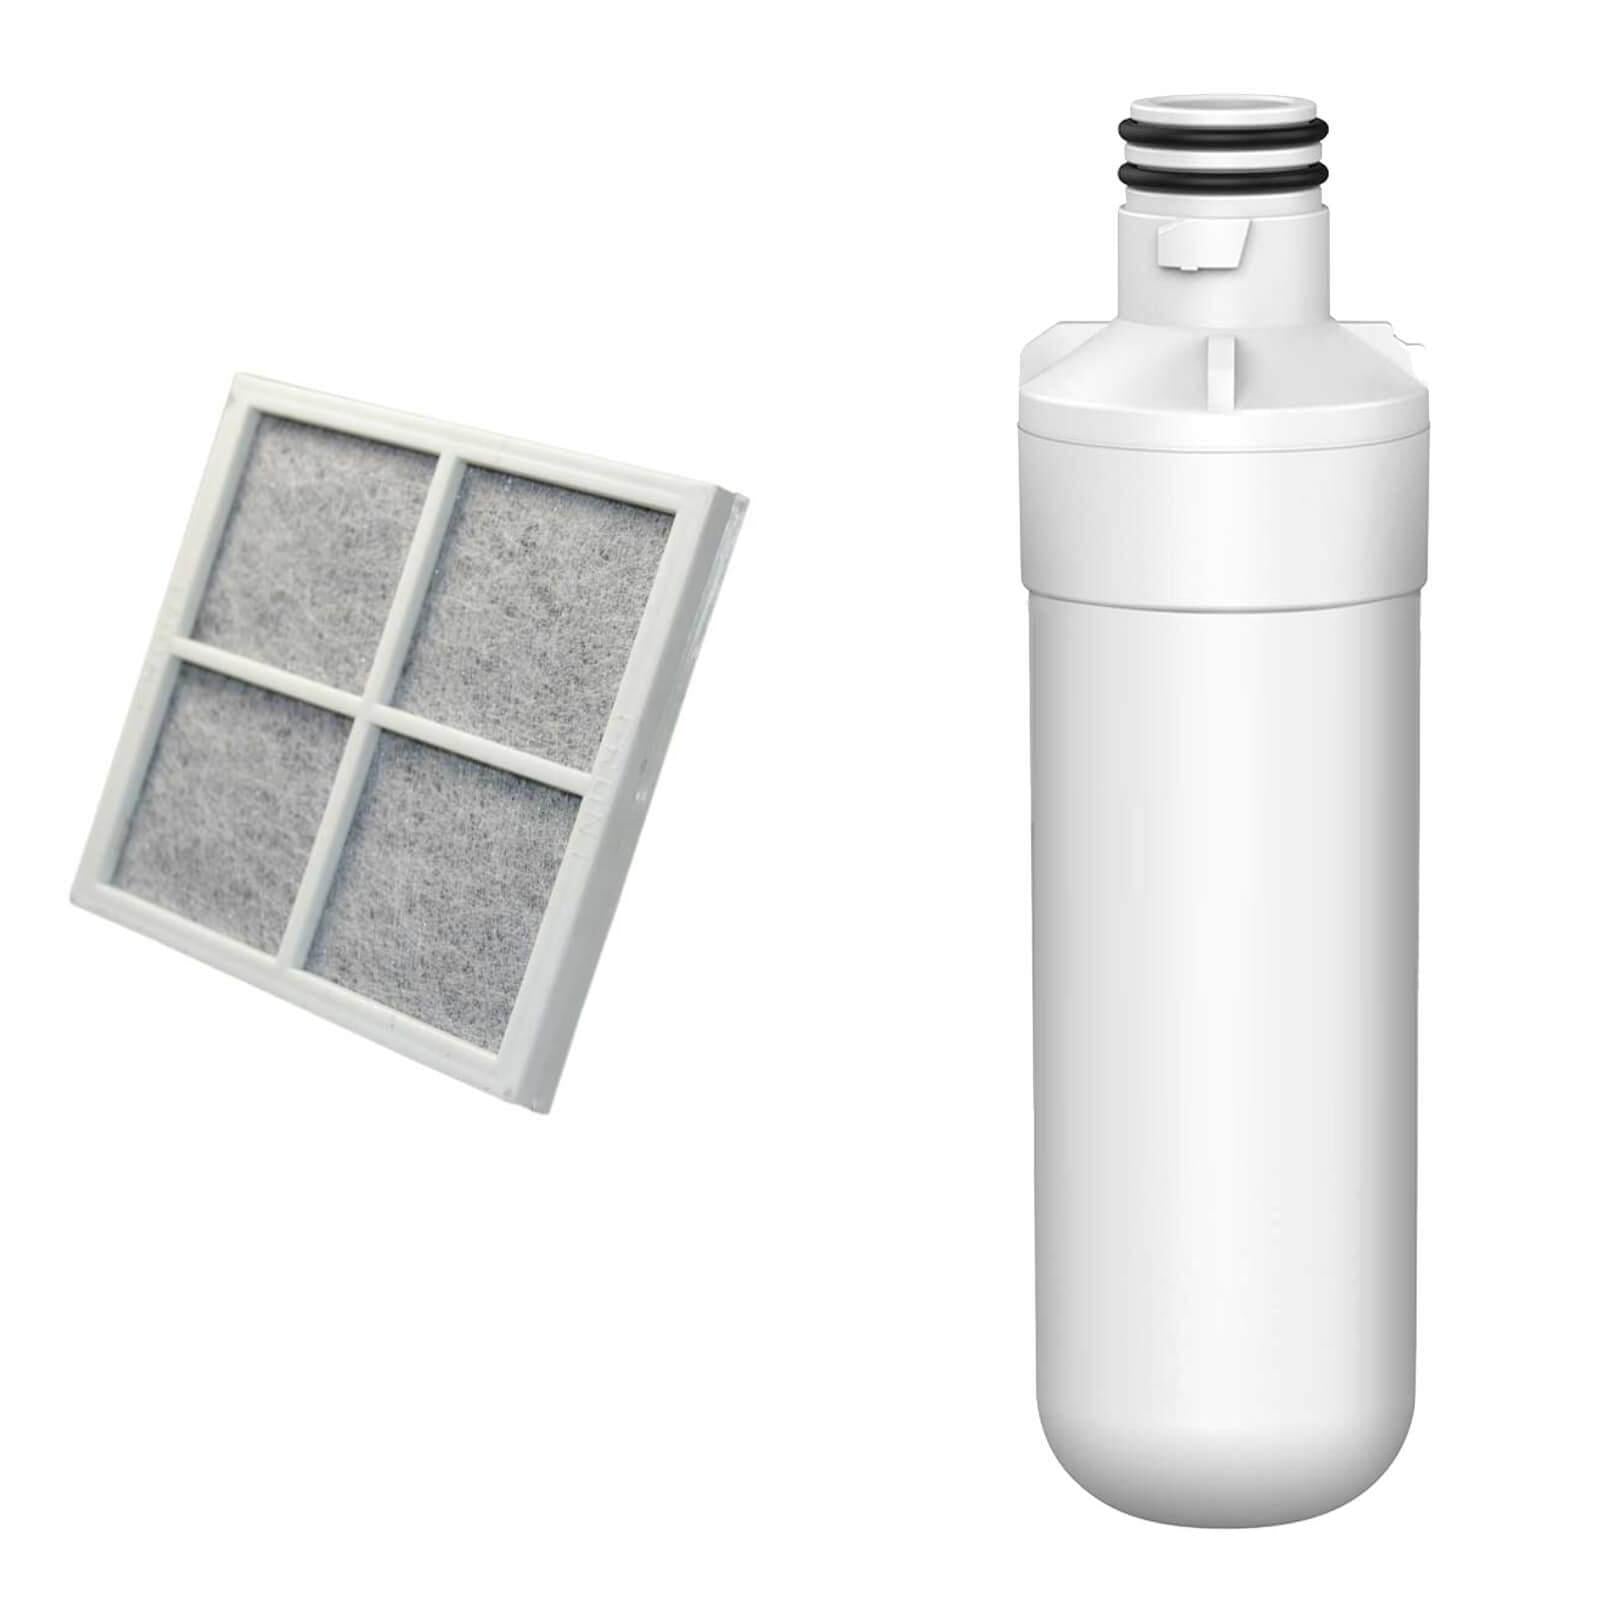 Fridge Filter For LG LT1000P Compatible with LG LT120F replacing air filter Sparesbarn